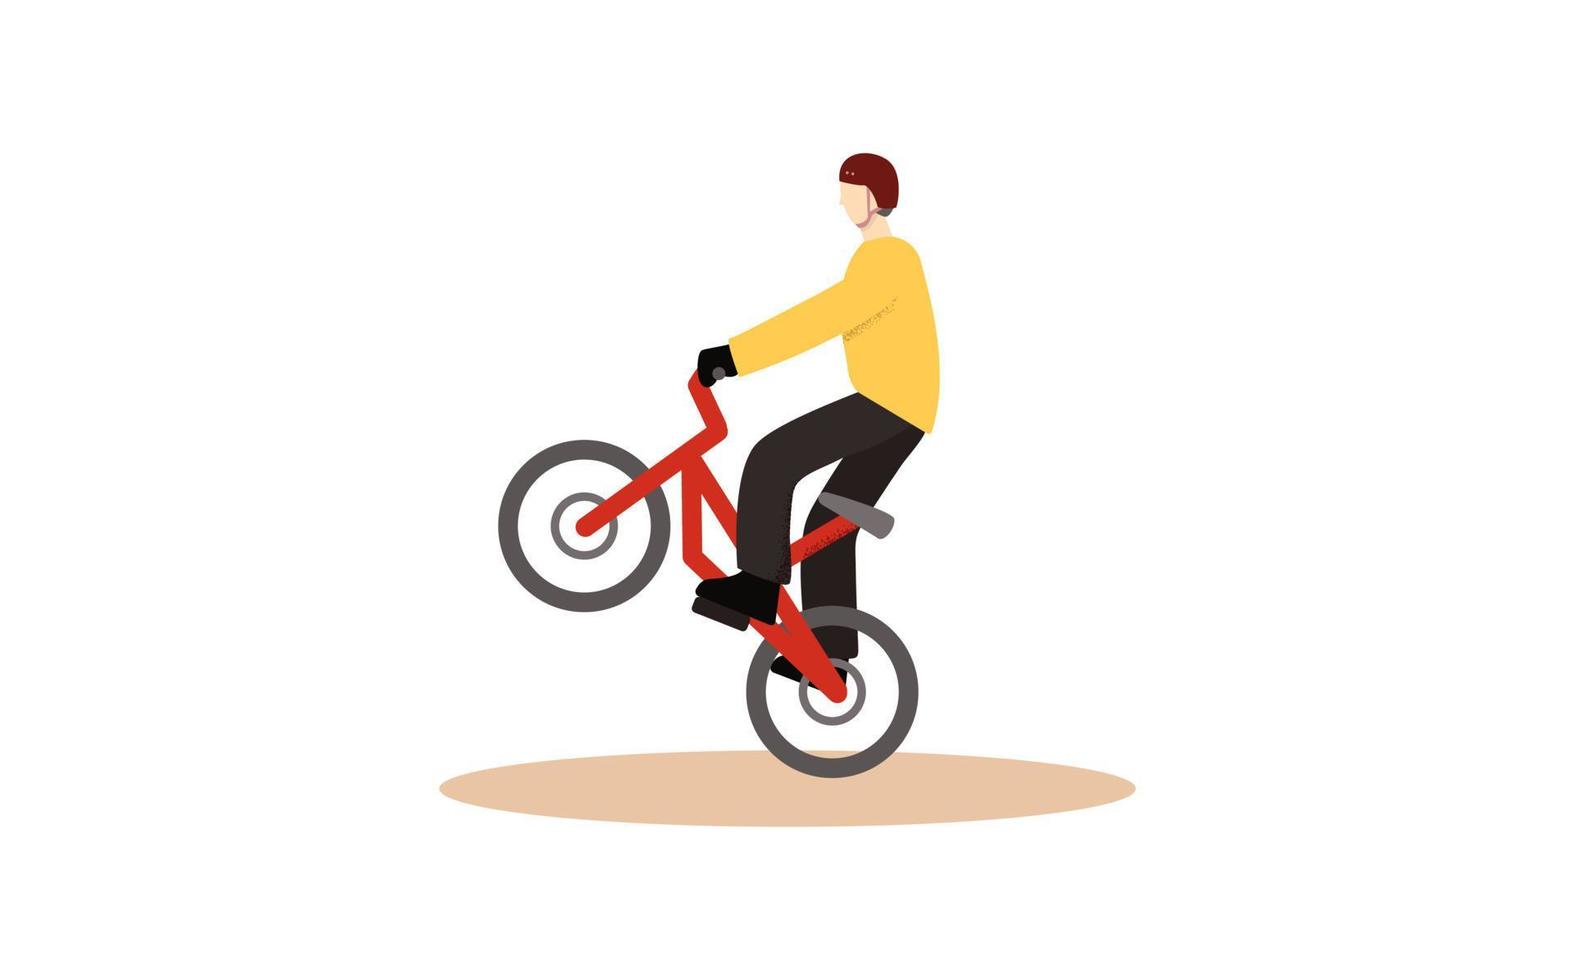 A guy in a helmet on a red bmx bike. Urban art of extreme sports, racing, stunts on the streets and roads. Freestyle style speed and fun. Wind graphics vector